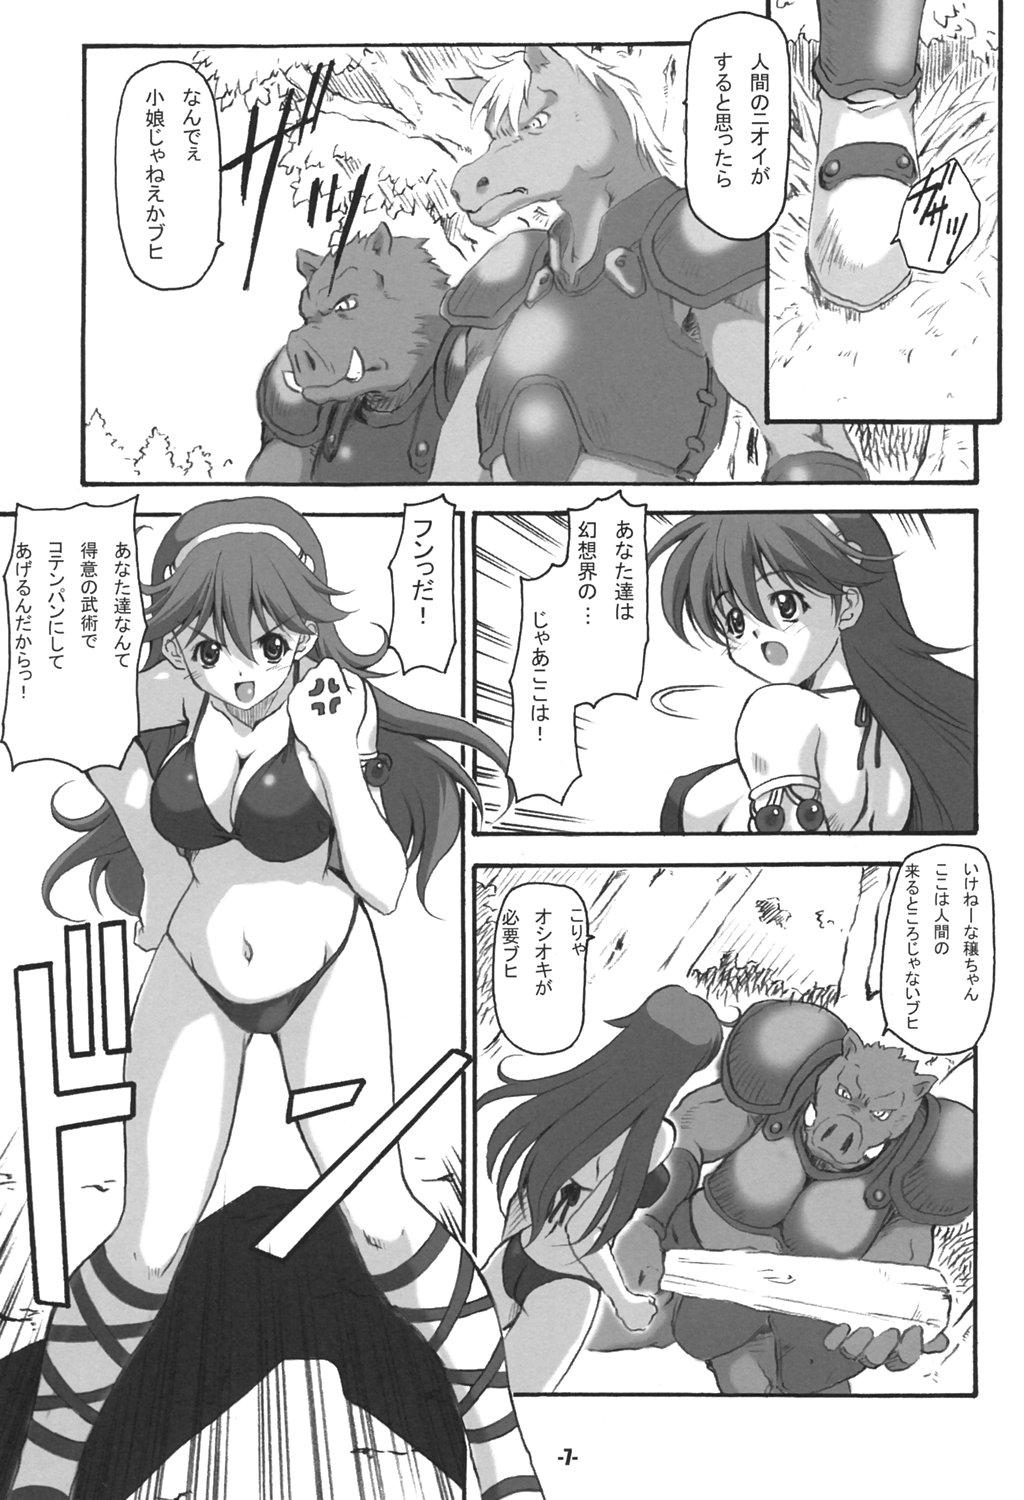 Pounded A's EXtra strage vol. 18 - King of fighters Rabo - Page 6